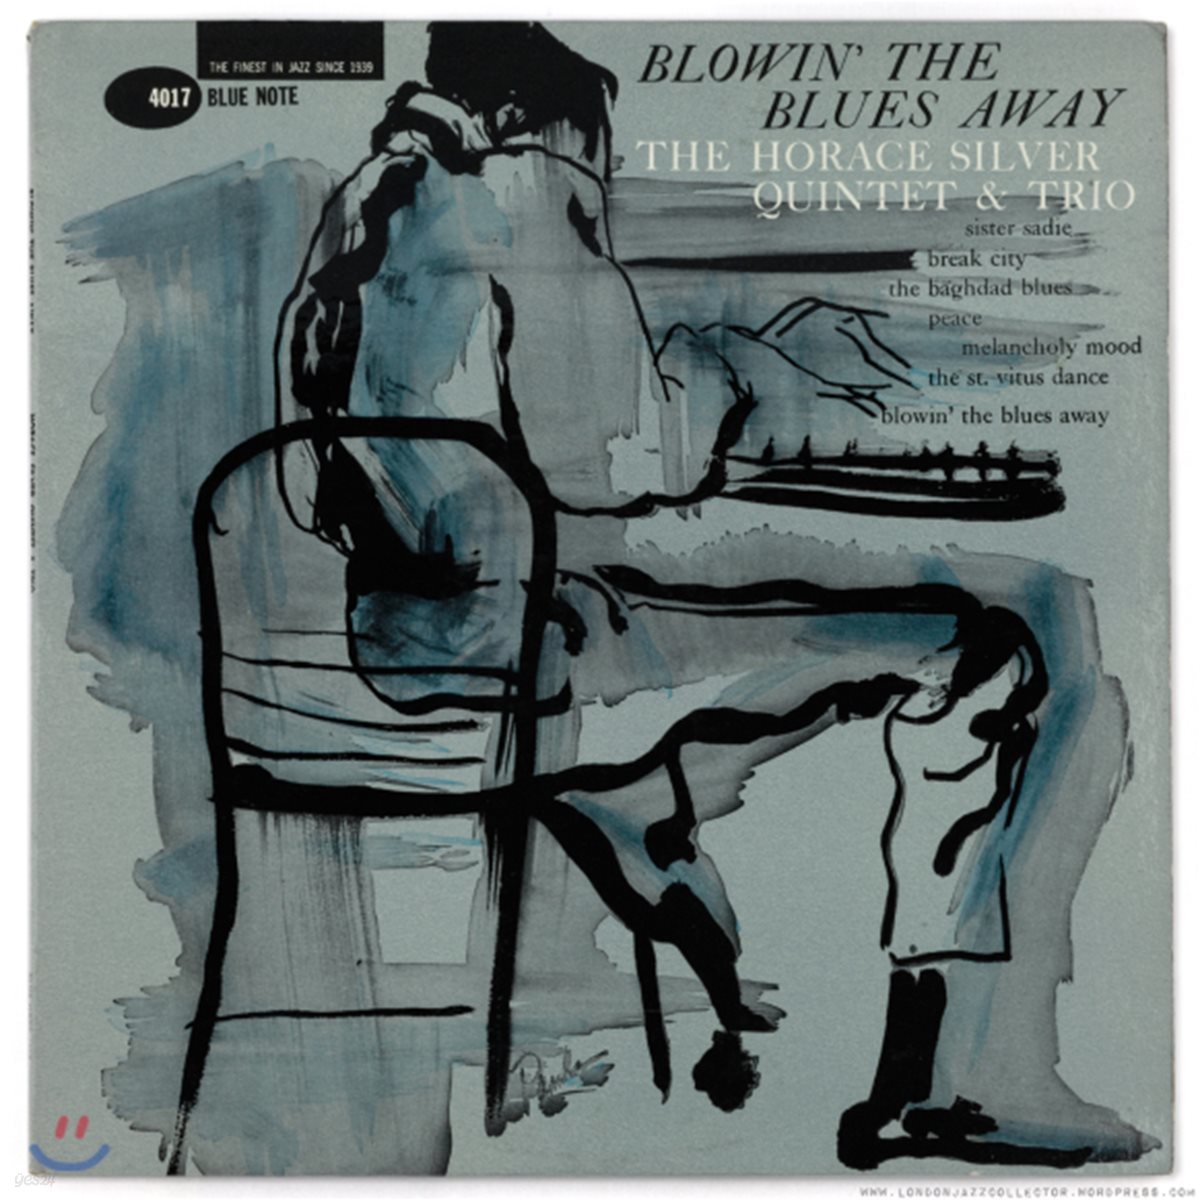 Horace Silver Quintet and Trio - Blowin The Blues Away [LP]